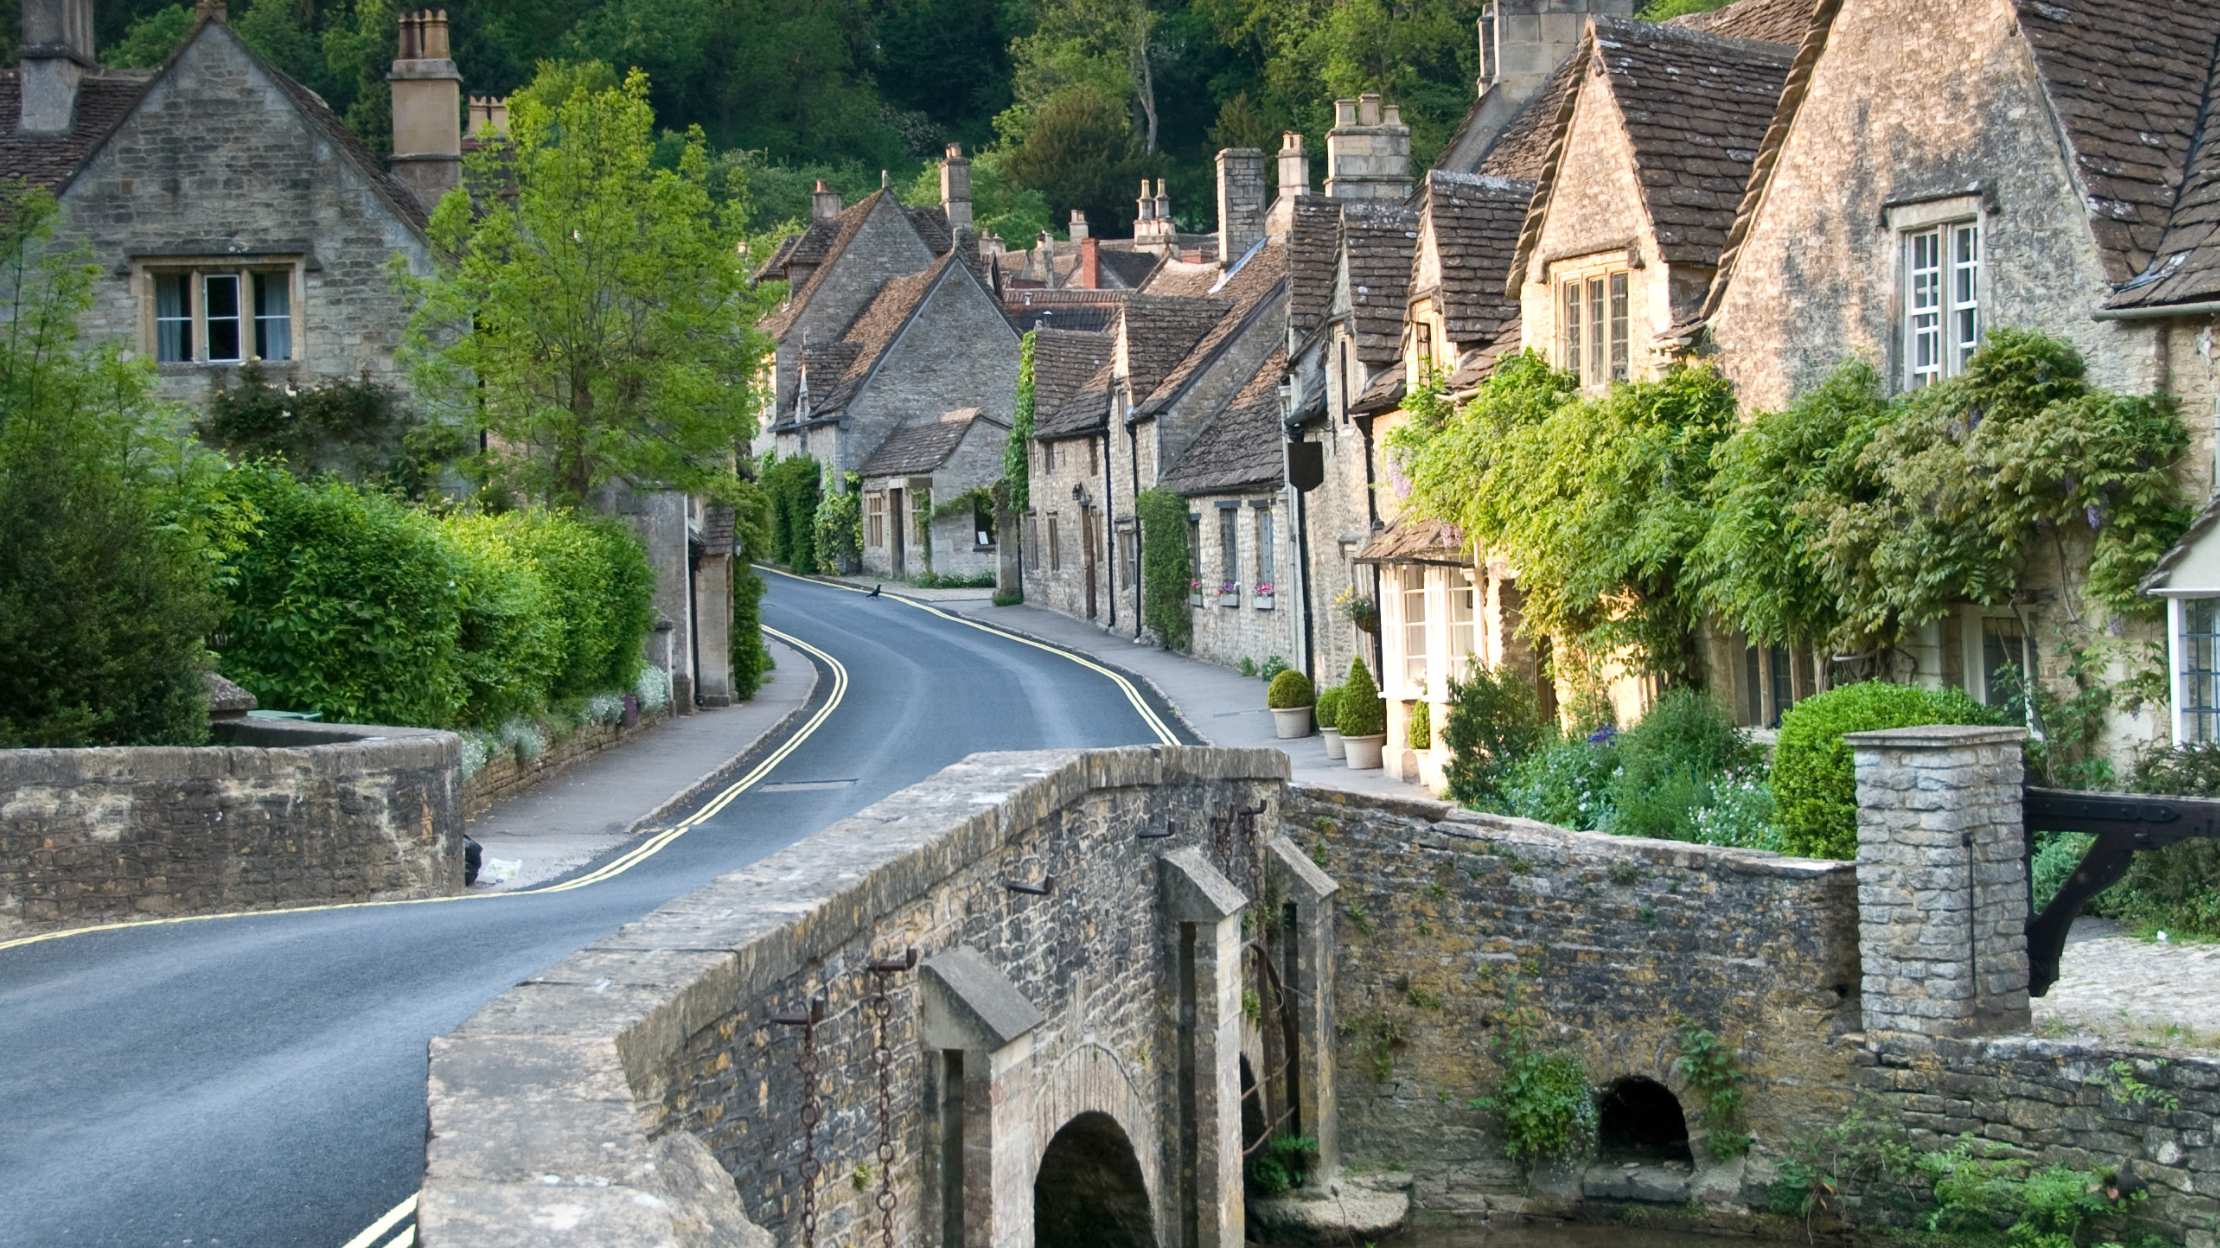 Top five places to explore in the Cotswolds